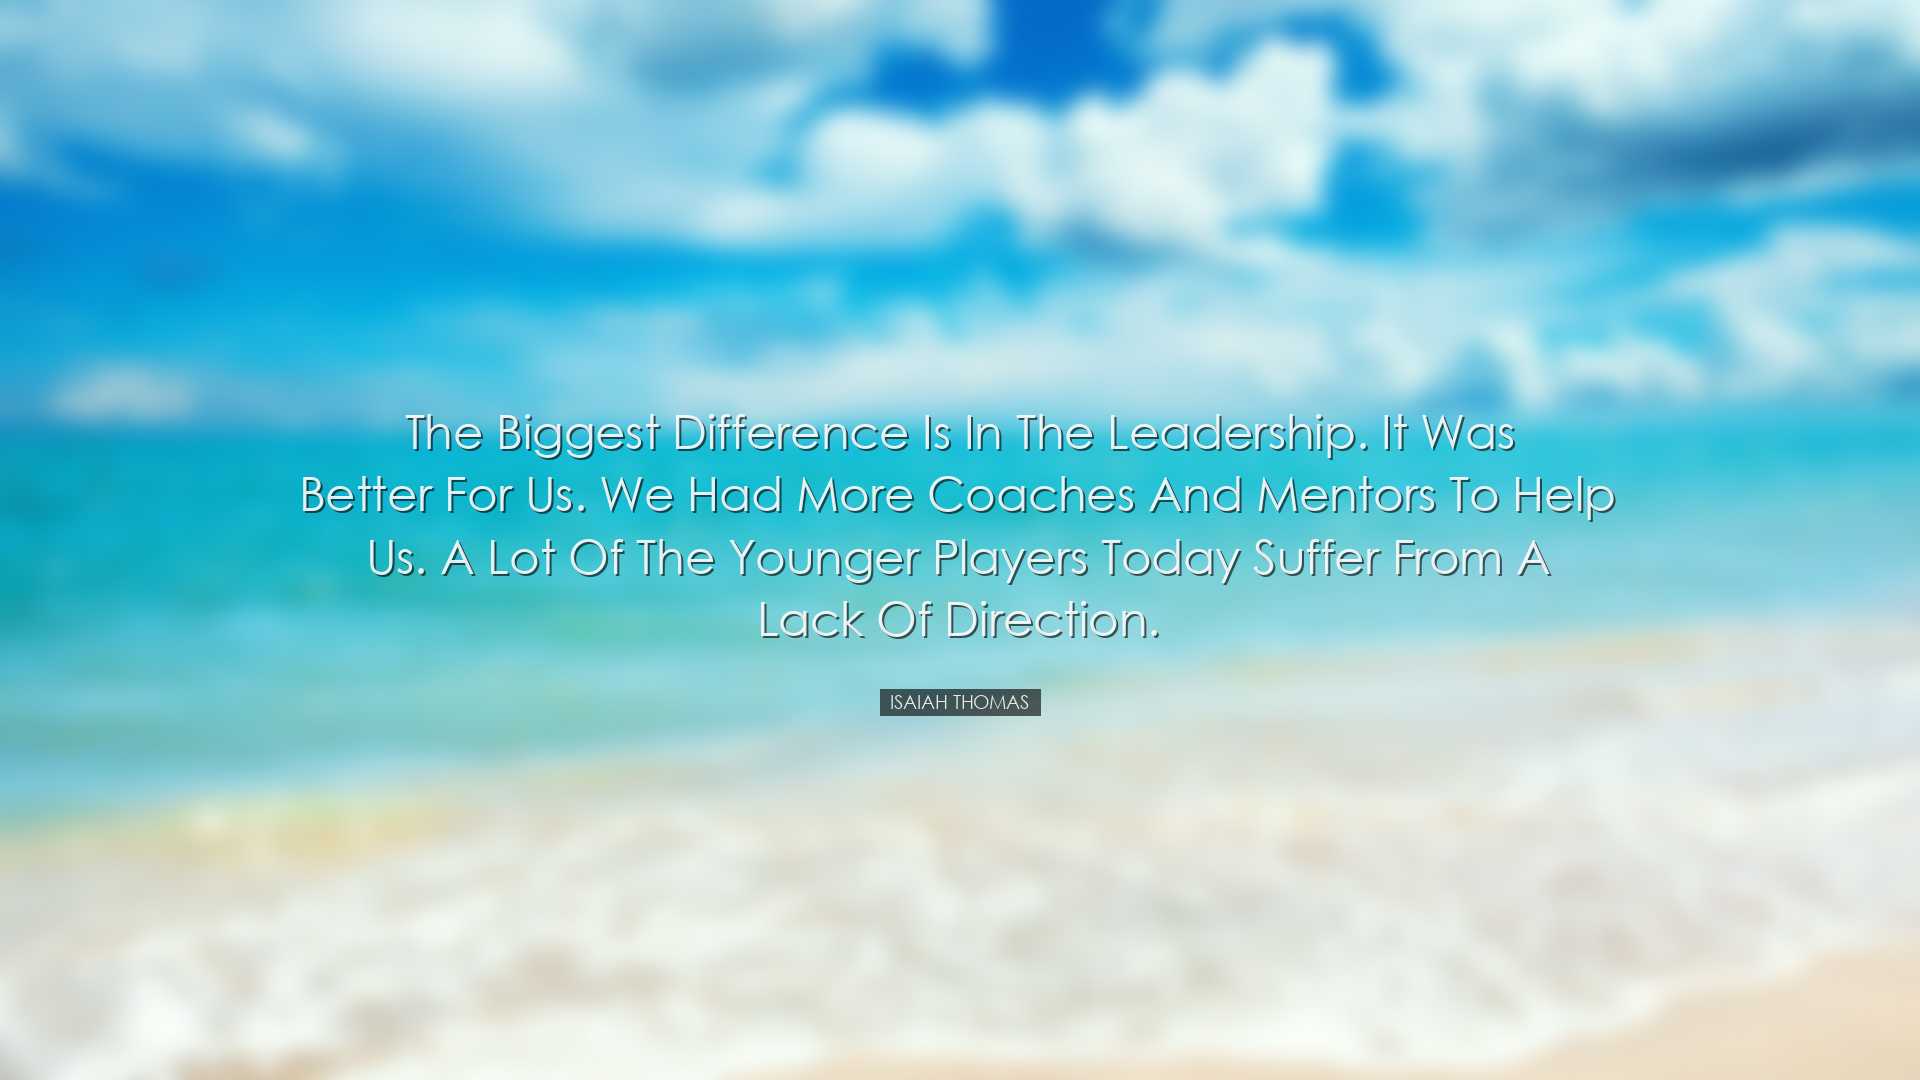 The biggest difference is in the leadership. It was better for us.